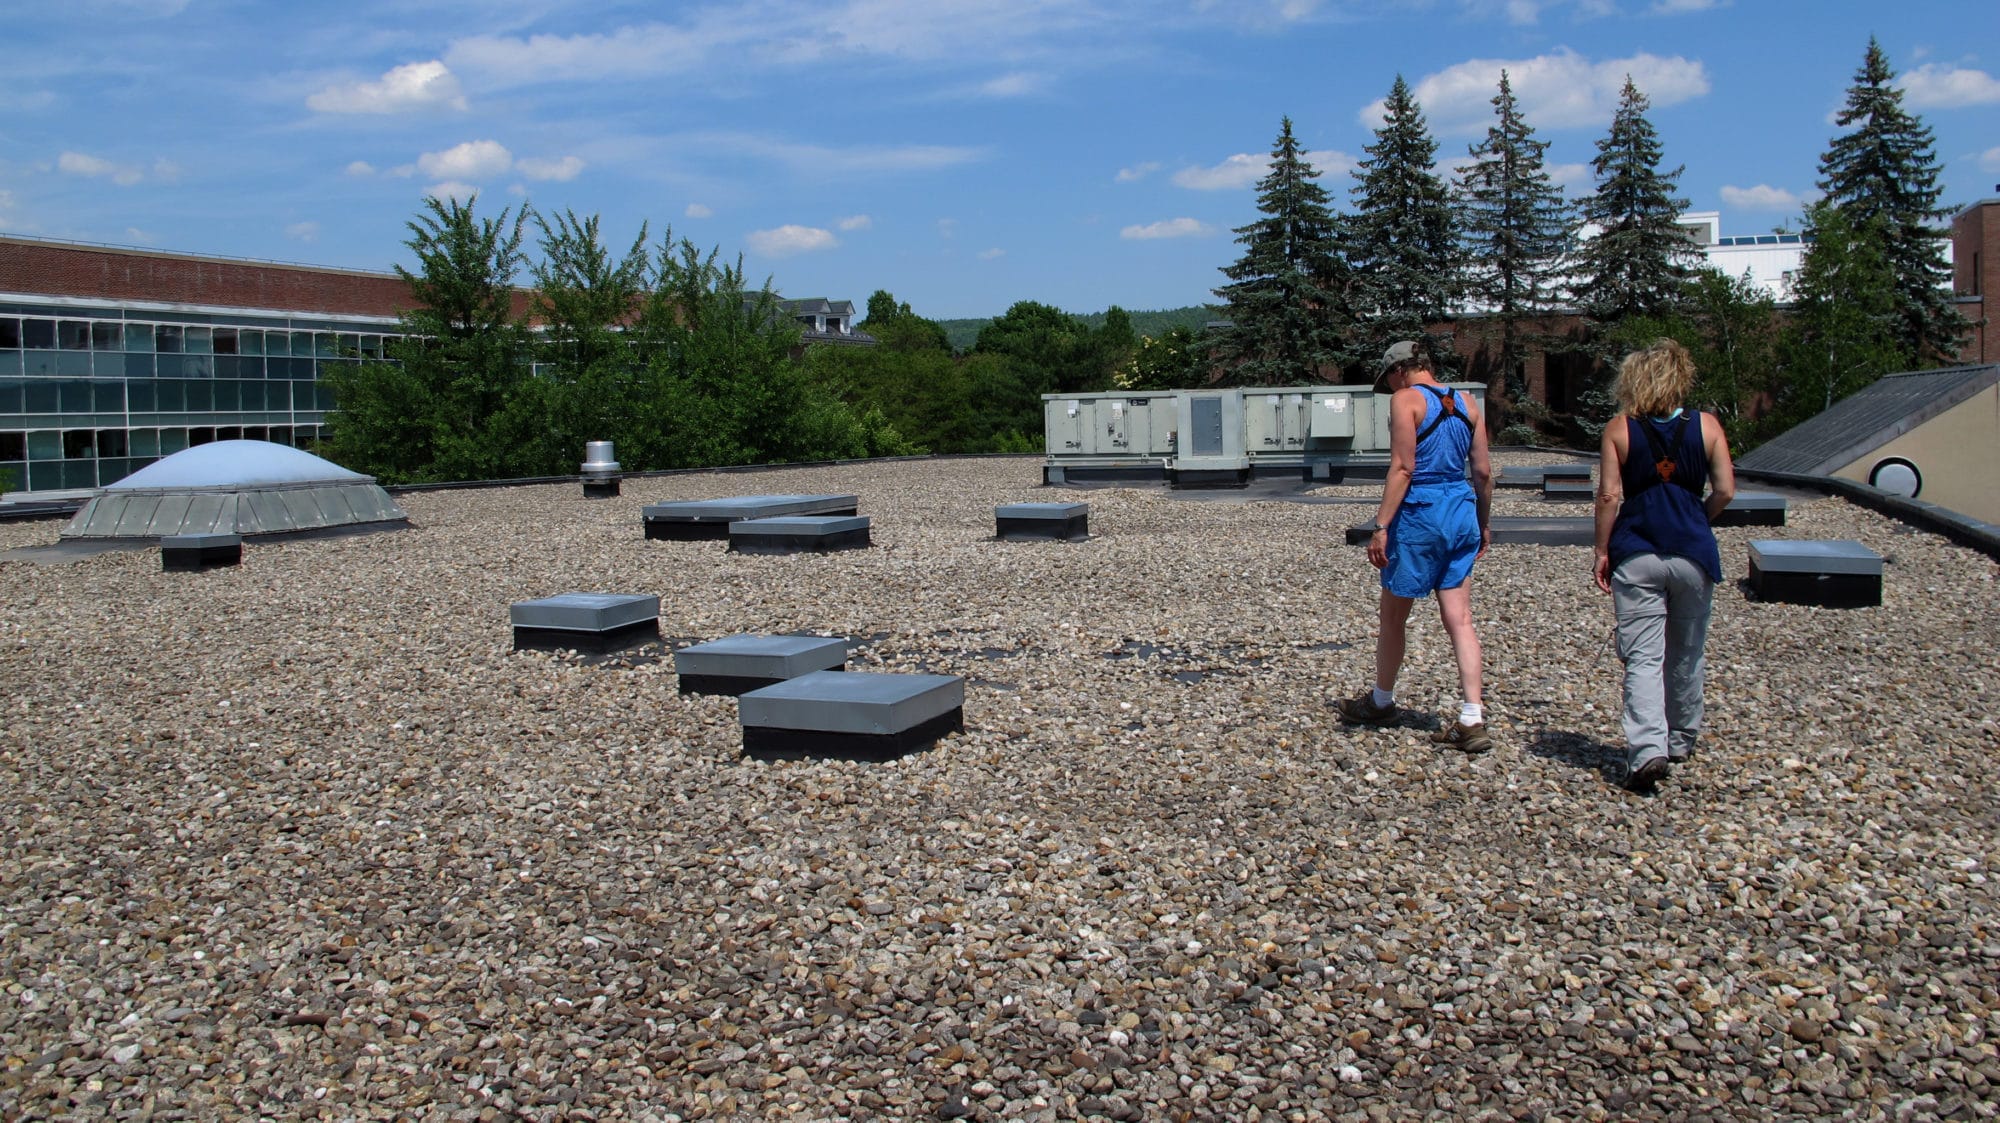 New Hampshire Audubon staff scour the roof of the Media Arts Center at Keene State College for any sign of nighthawk nesting. (photo © Brett Amy Thelen)